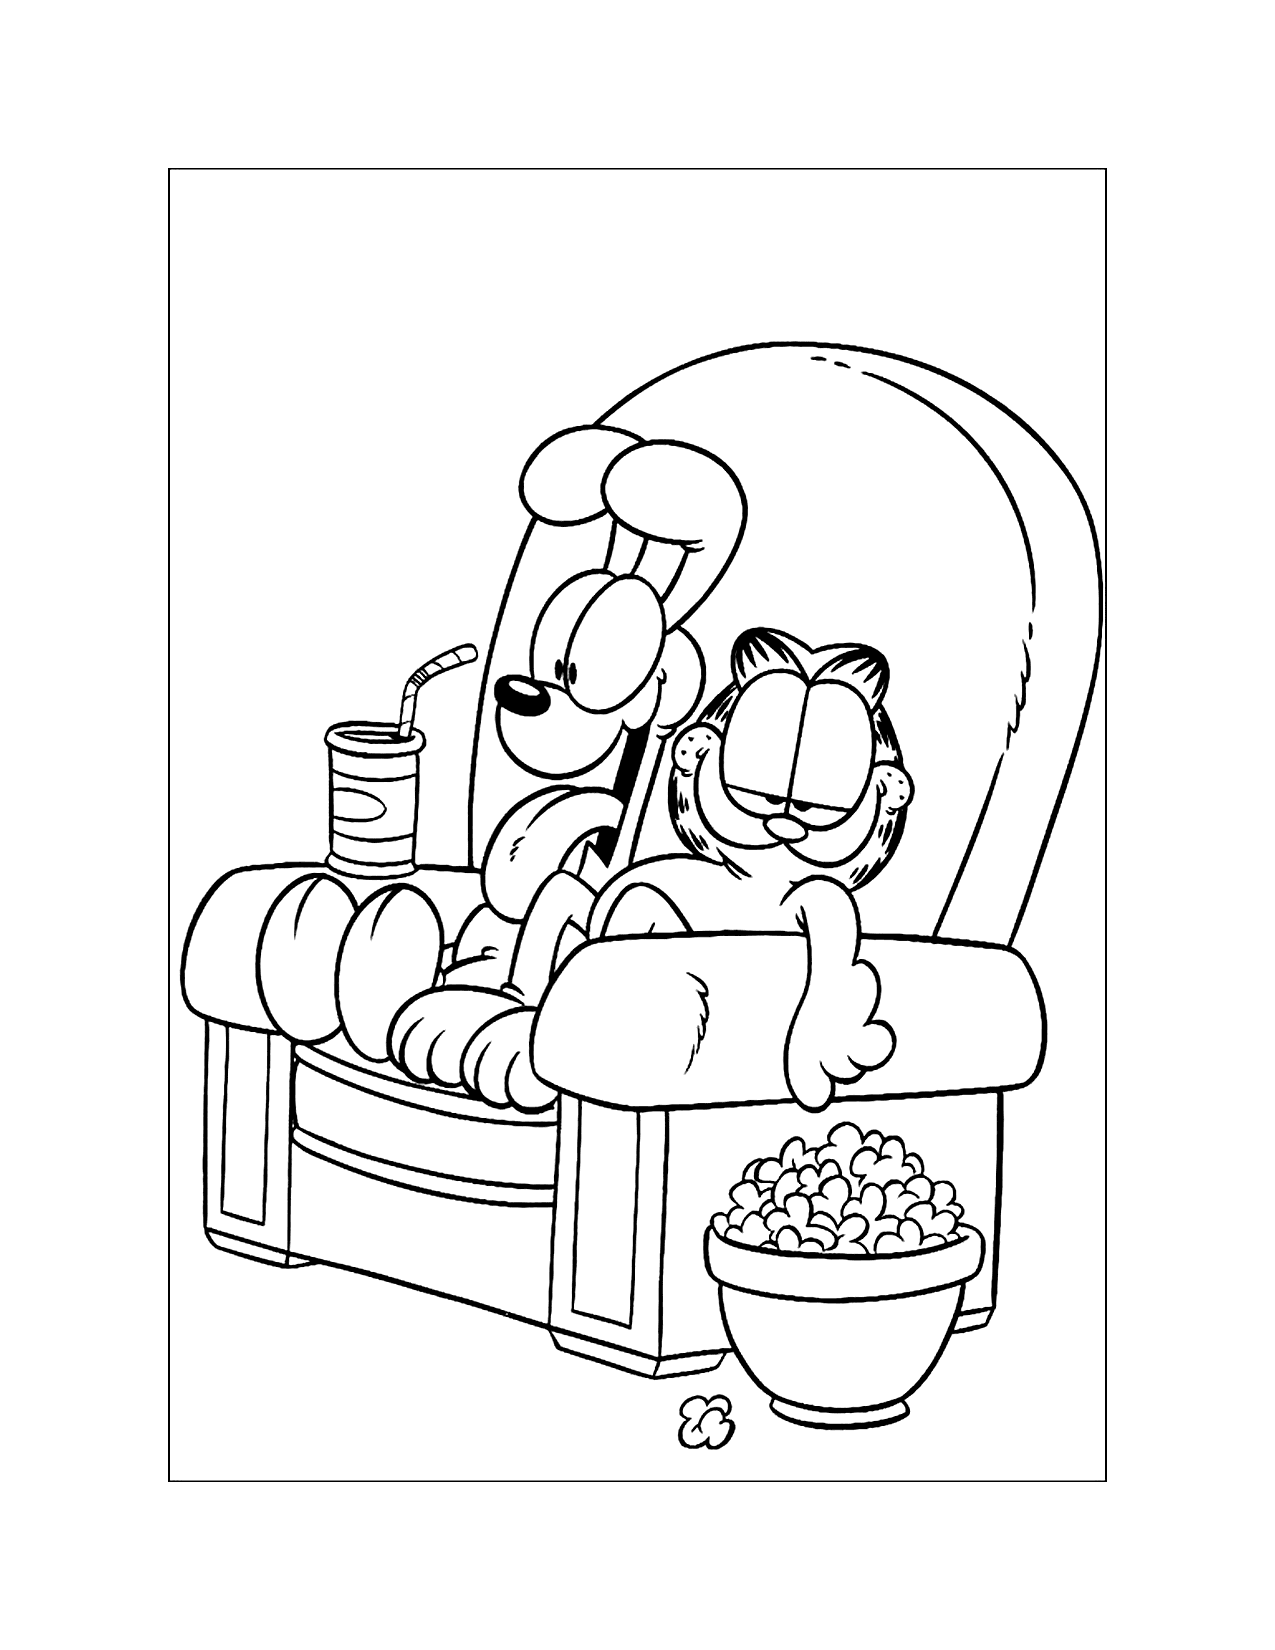 Garfield And Odie Watching Movies